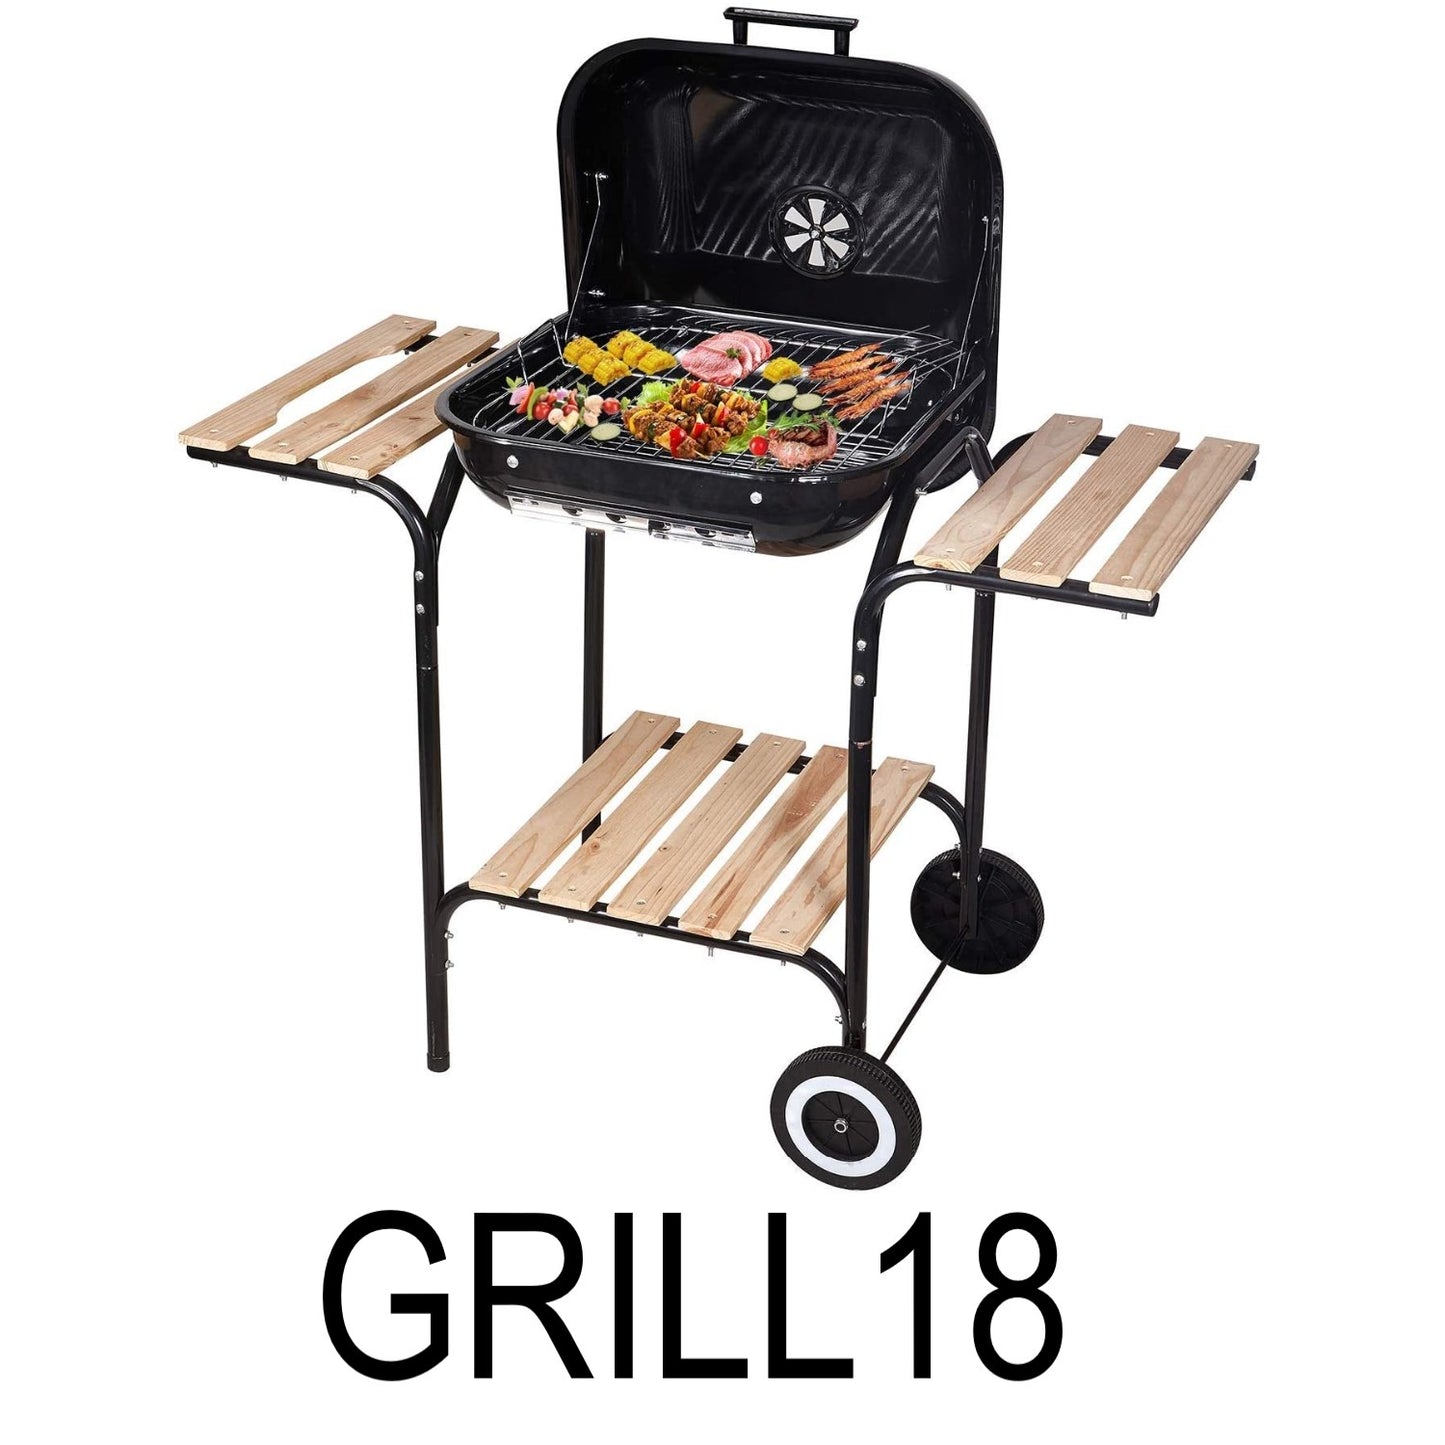 18" Multi Purpose Grill for Outdoor Camping, Garden, Family BBQ- Charcoal Grill